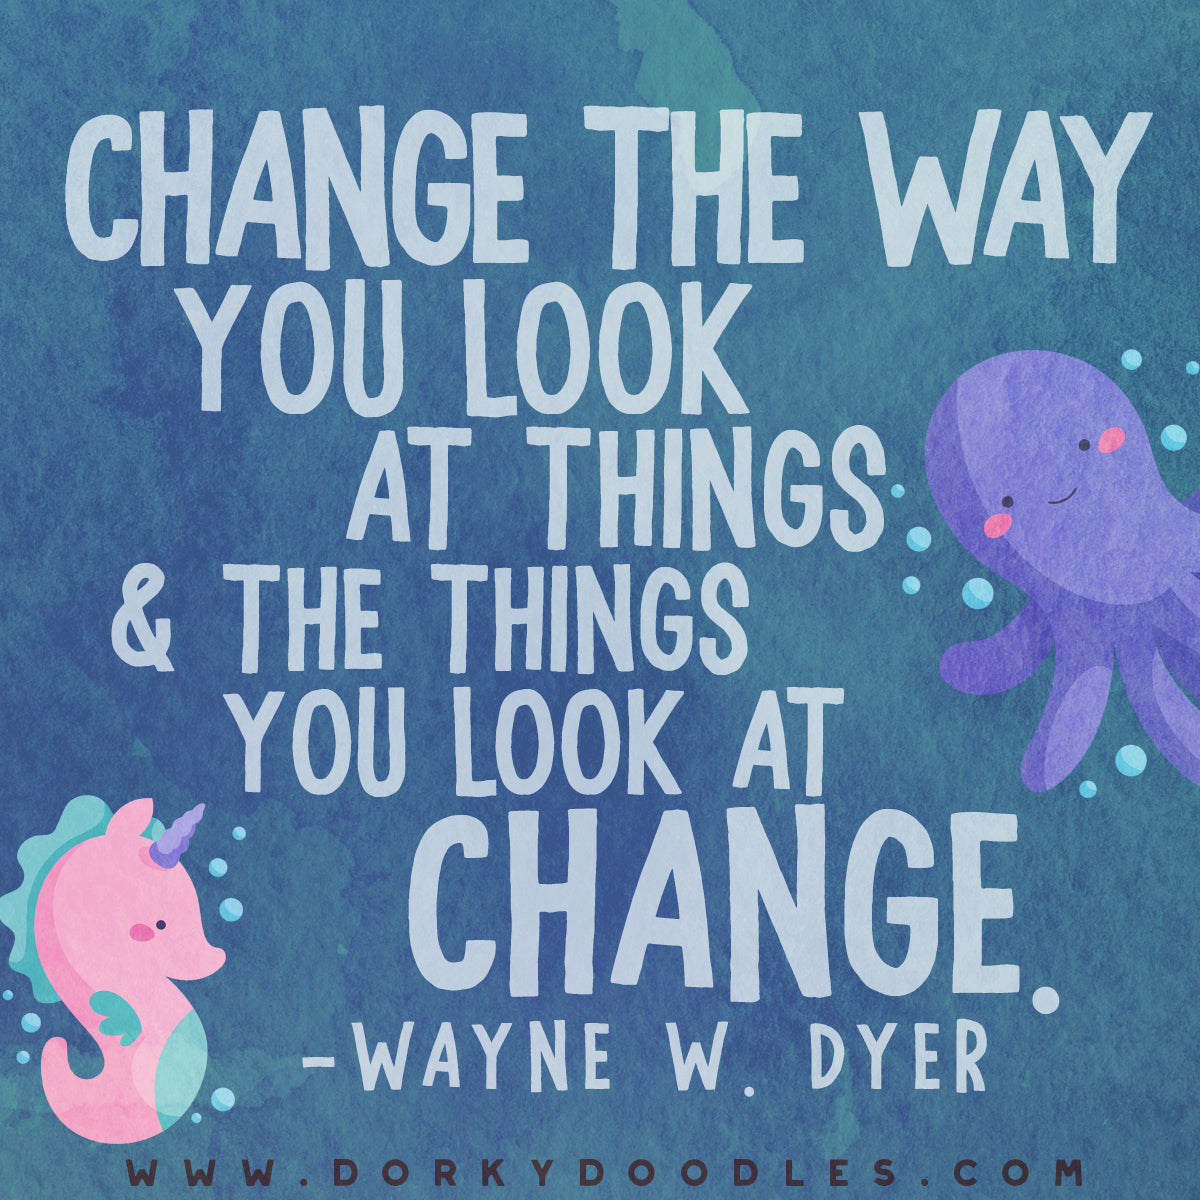 Motivation Monday - Change the Way You Look at Things – Dorky Doodles